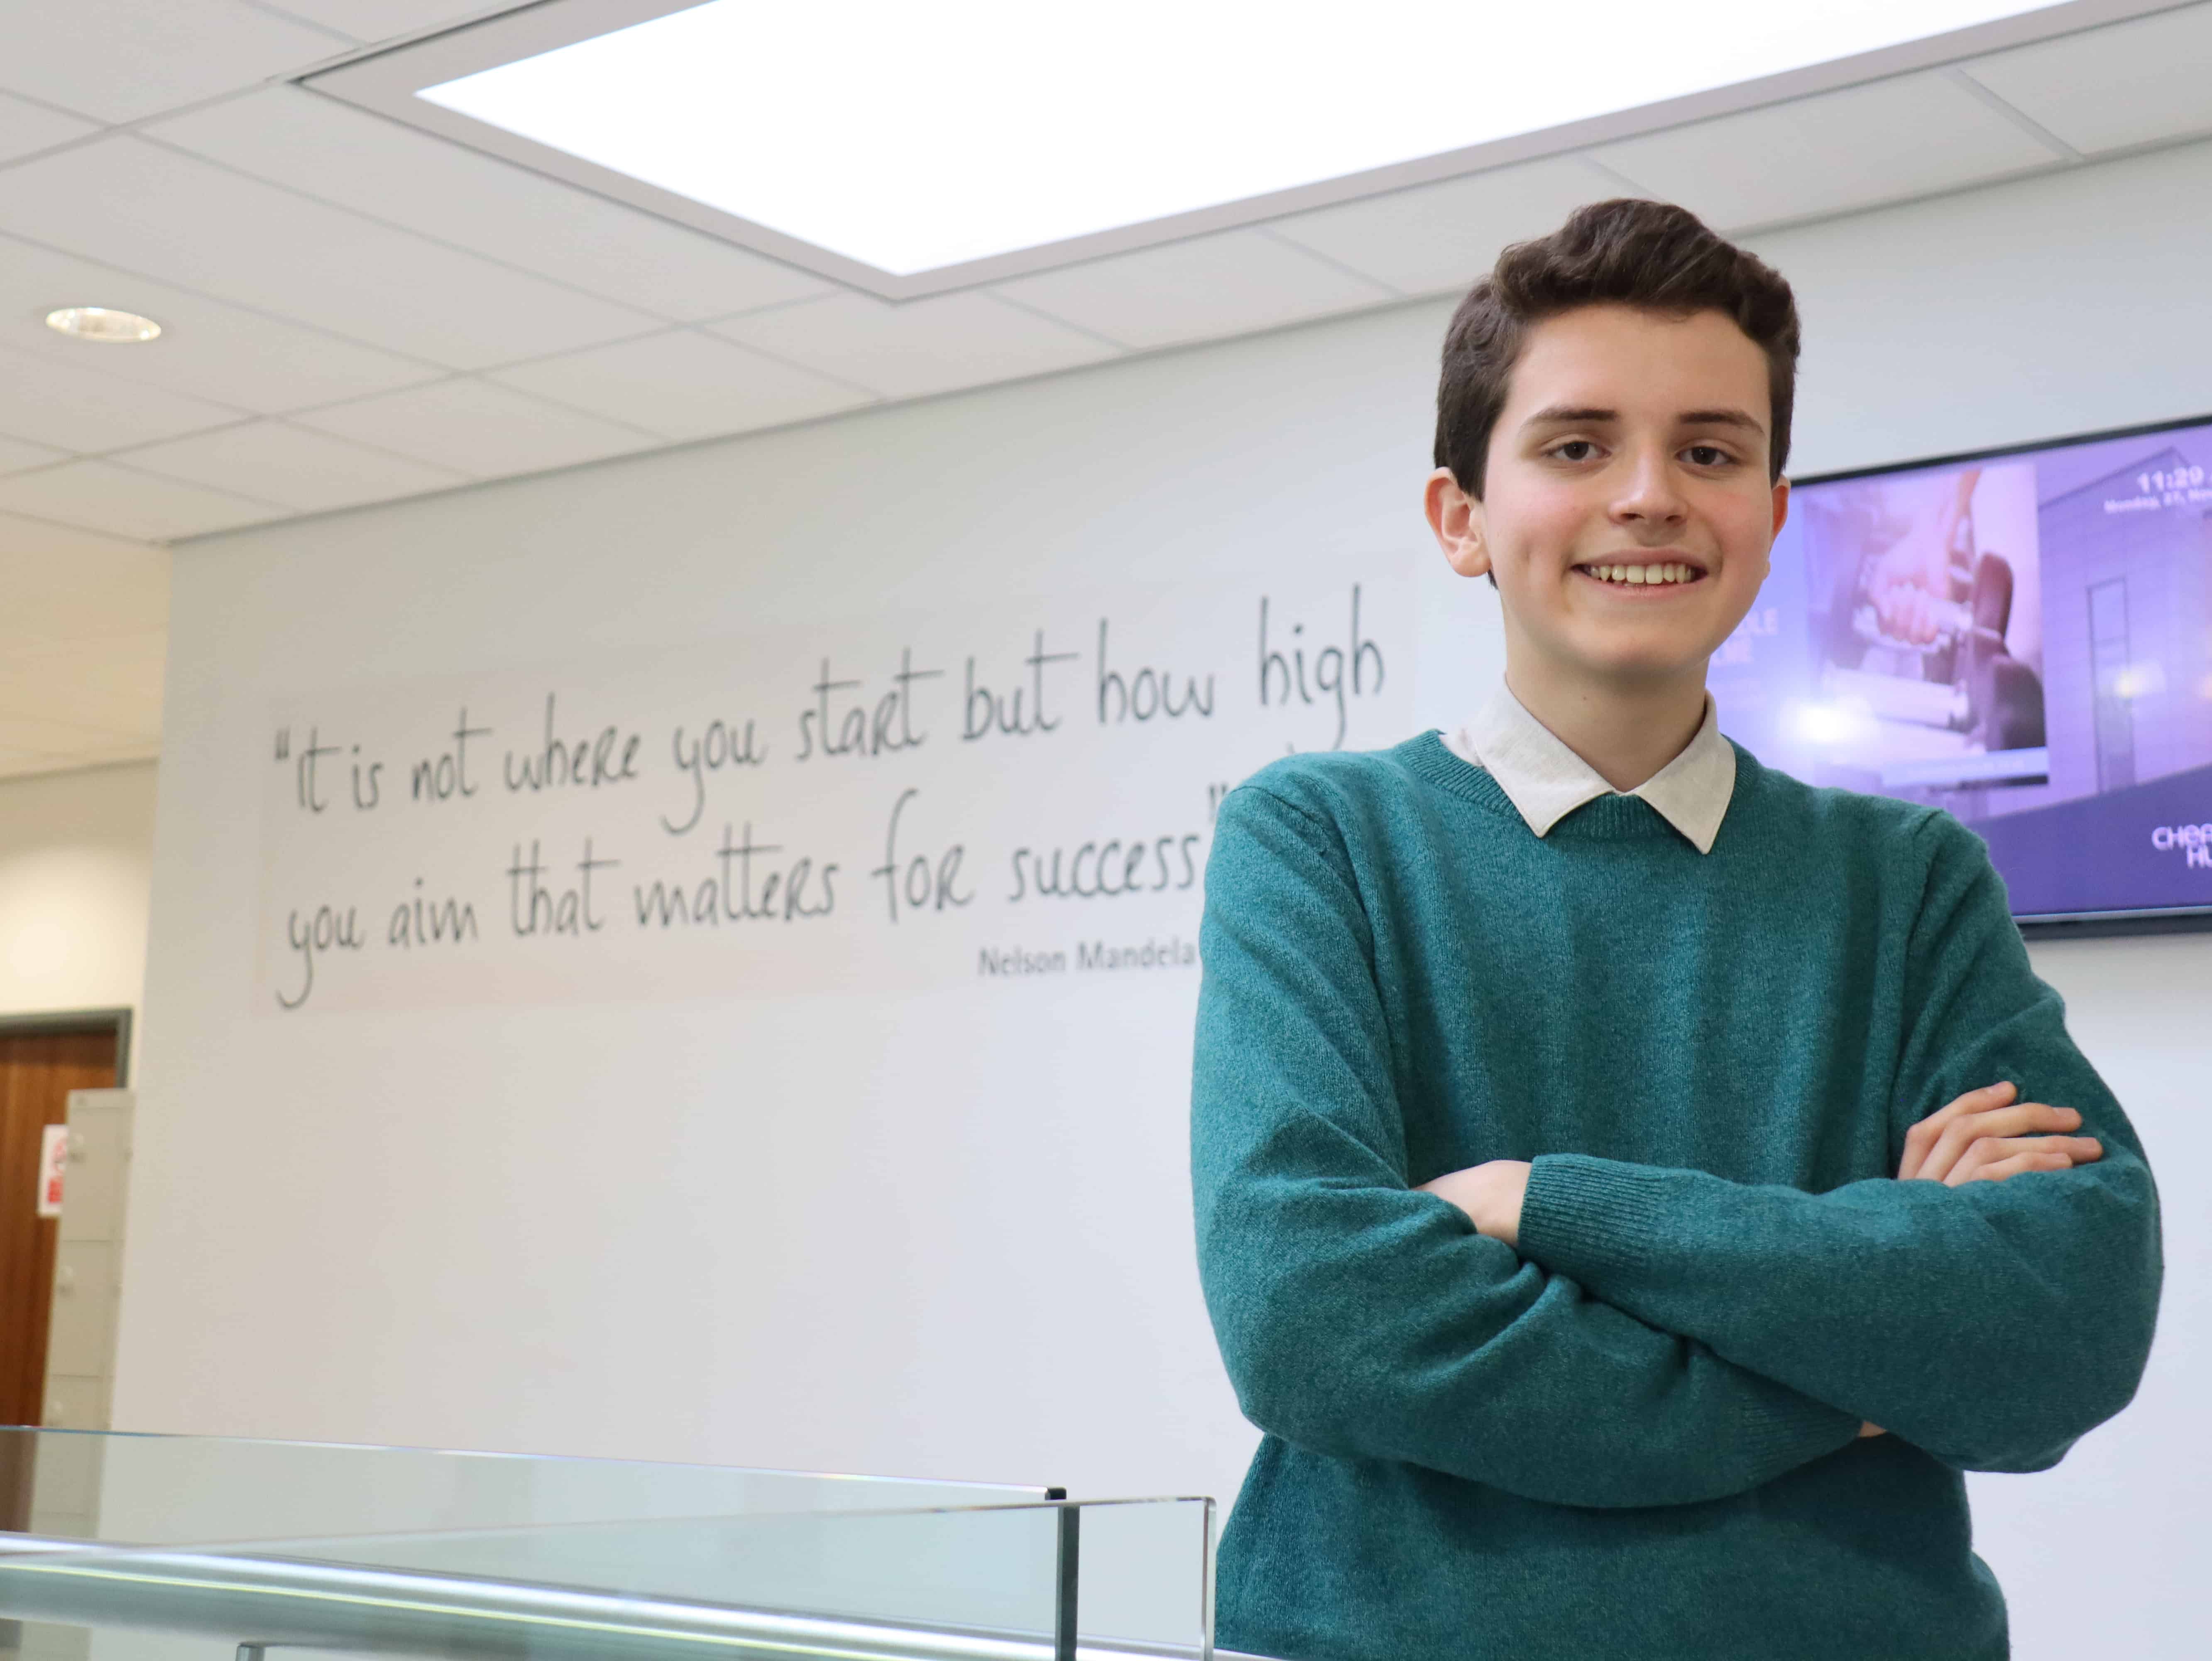 Cheadle Hulme Sixth Form student and Member of UK Youth Parliament, Rodrigo Palmer stands in the Sixth Form building in front of a wall that reads: "It is not where you start but how high you aim that matters for success"